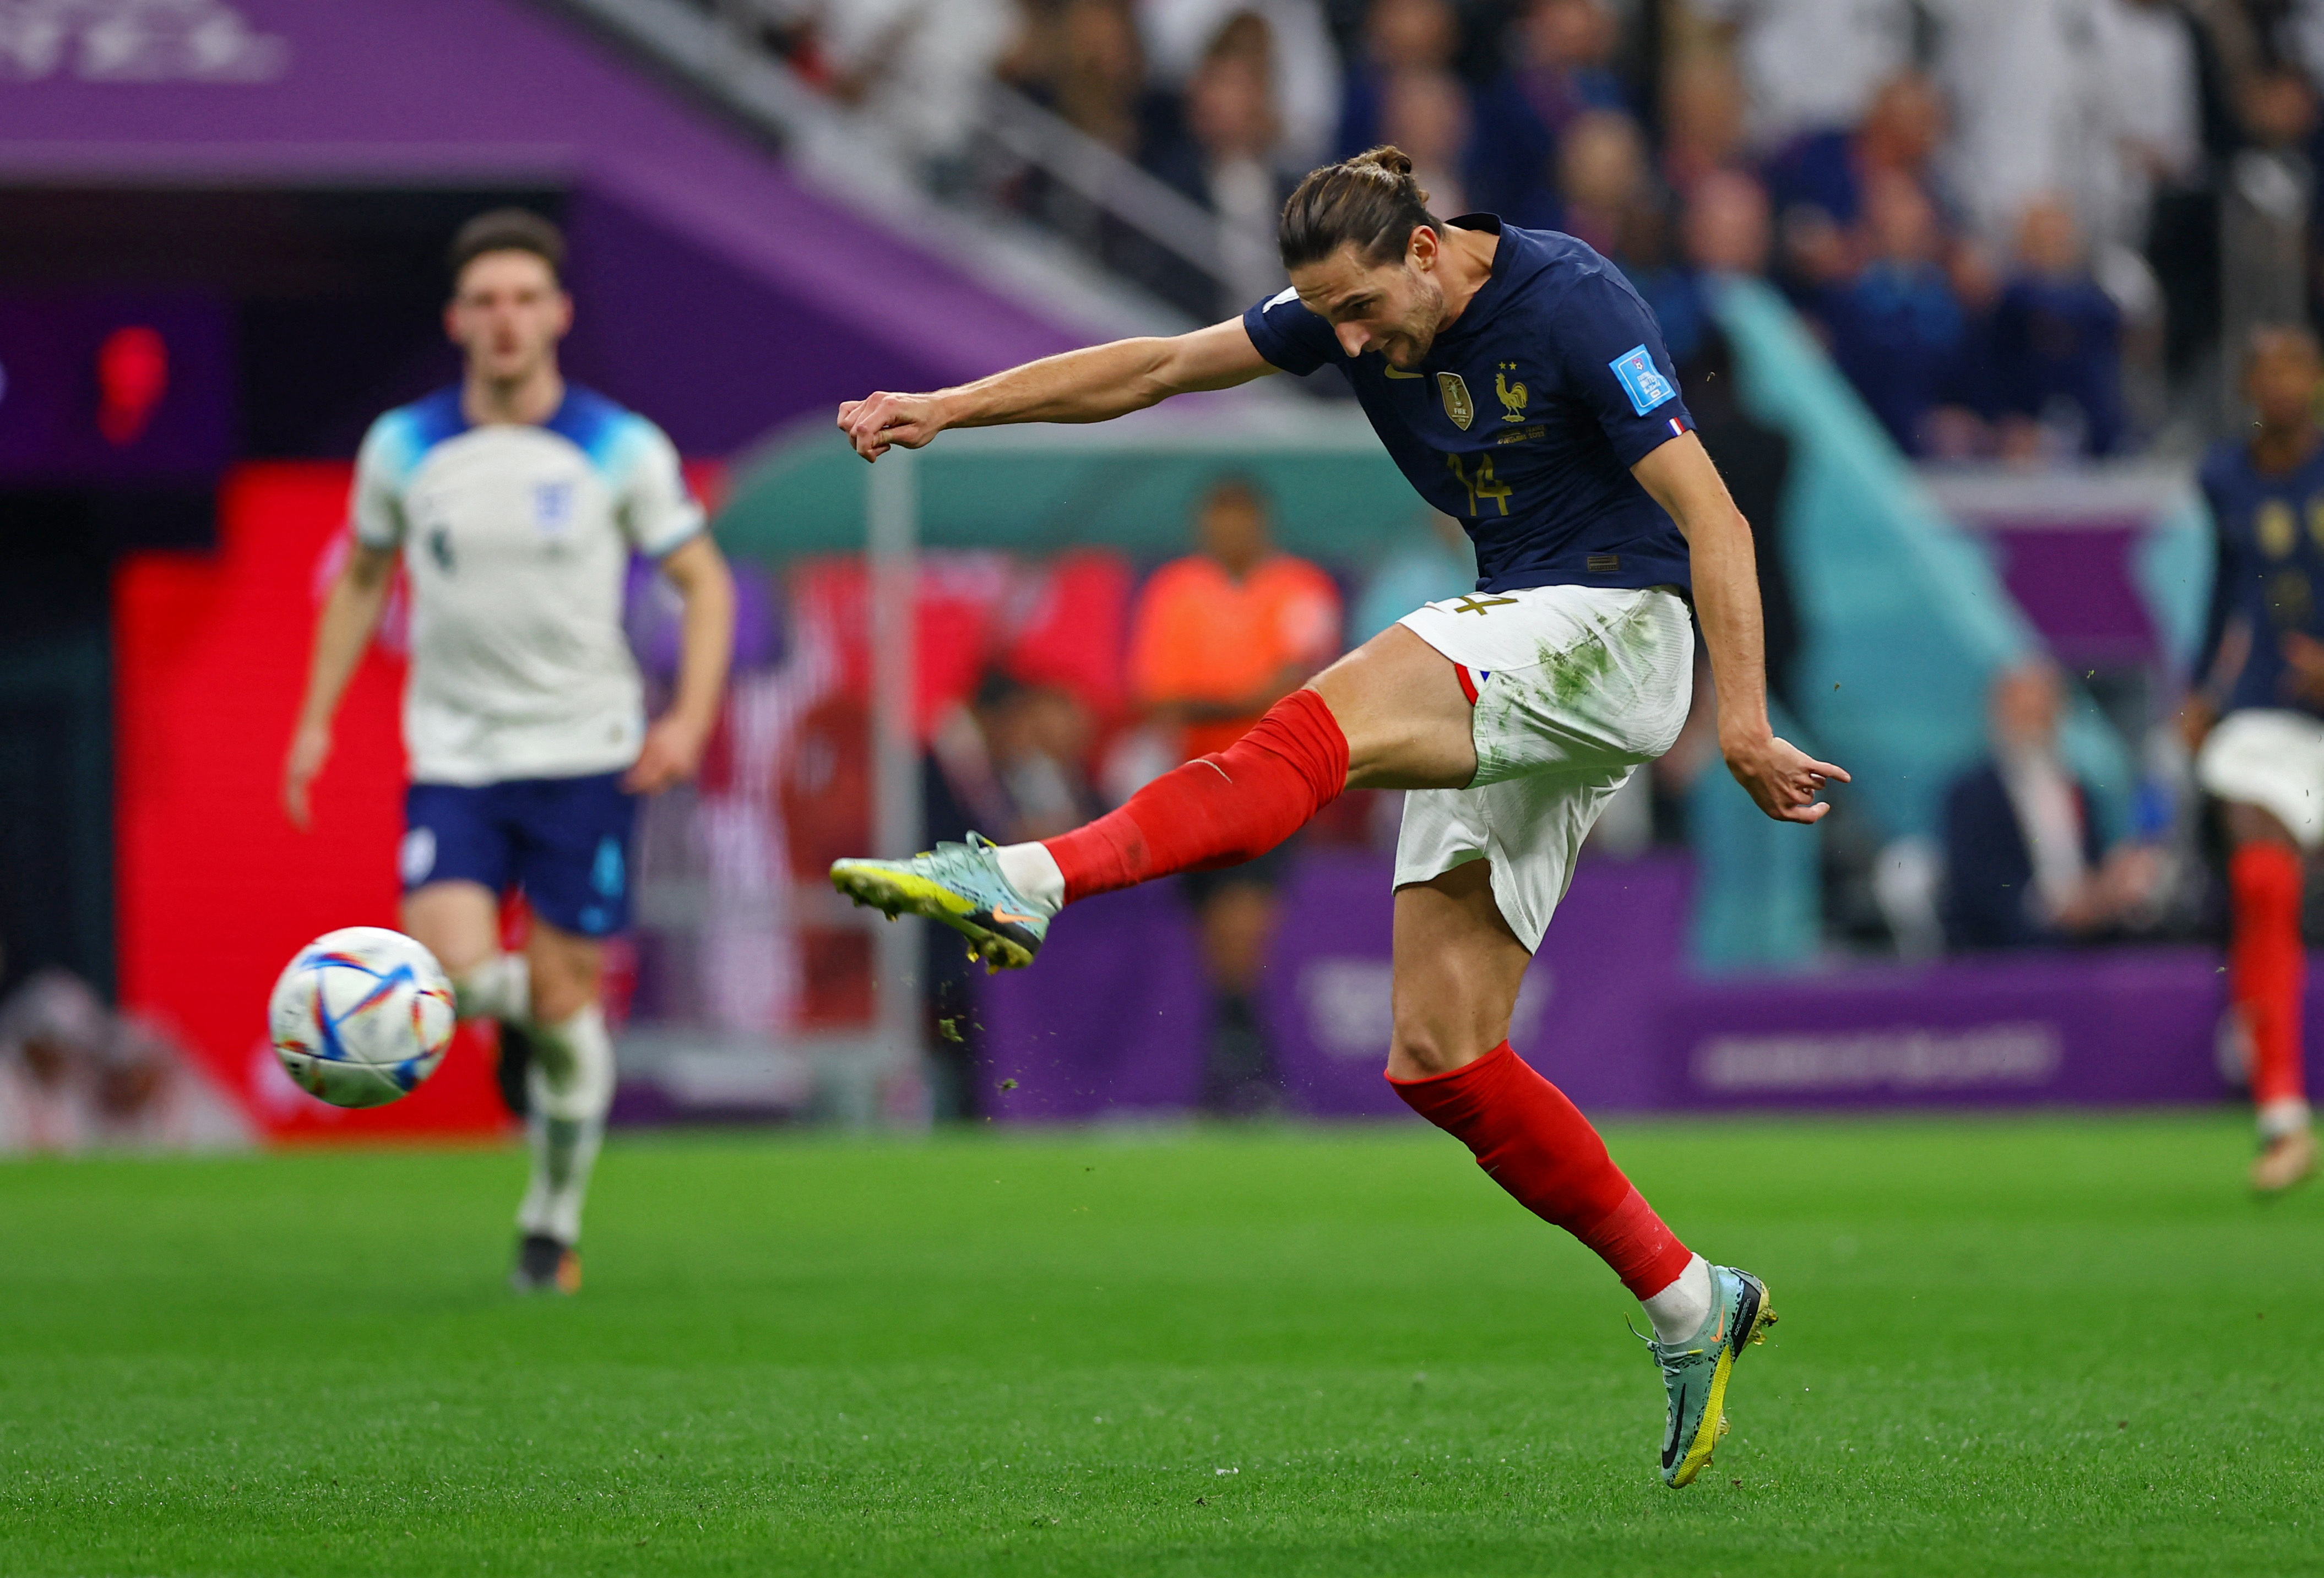 Adrien Rabiot was one of the figures of France in the World Cup (REUTERS / Matthew Childs)